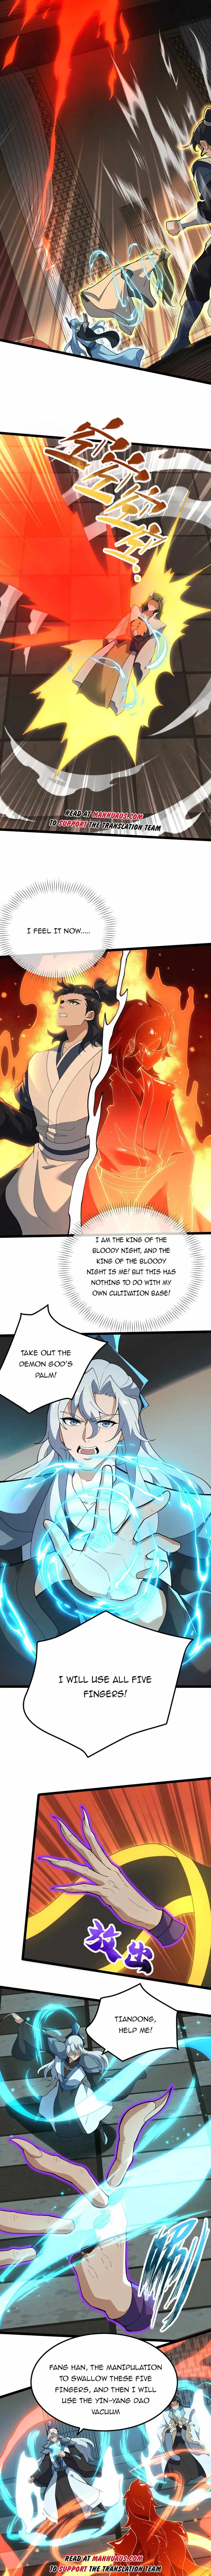 Eternal Life - Page 3